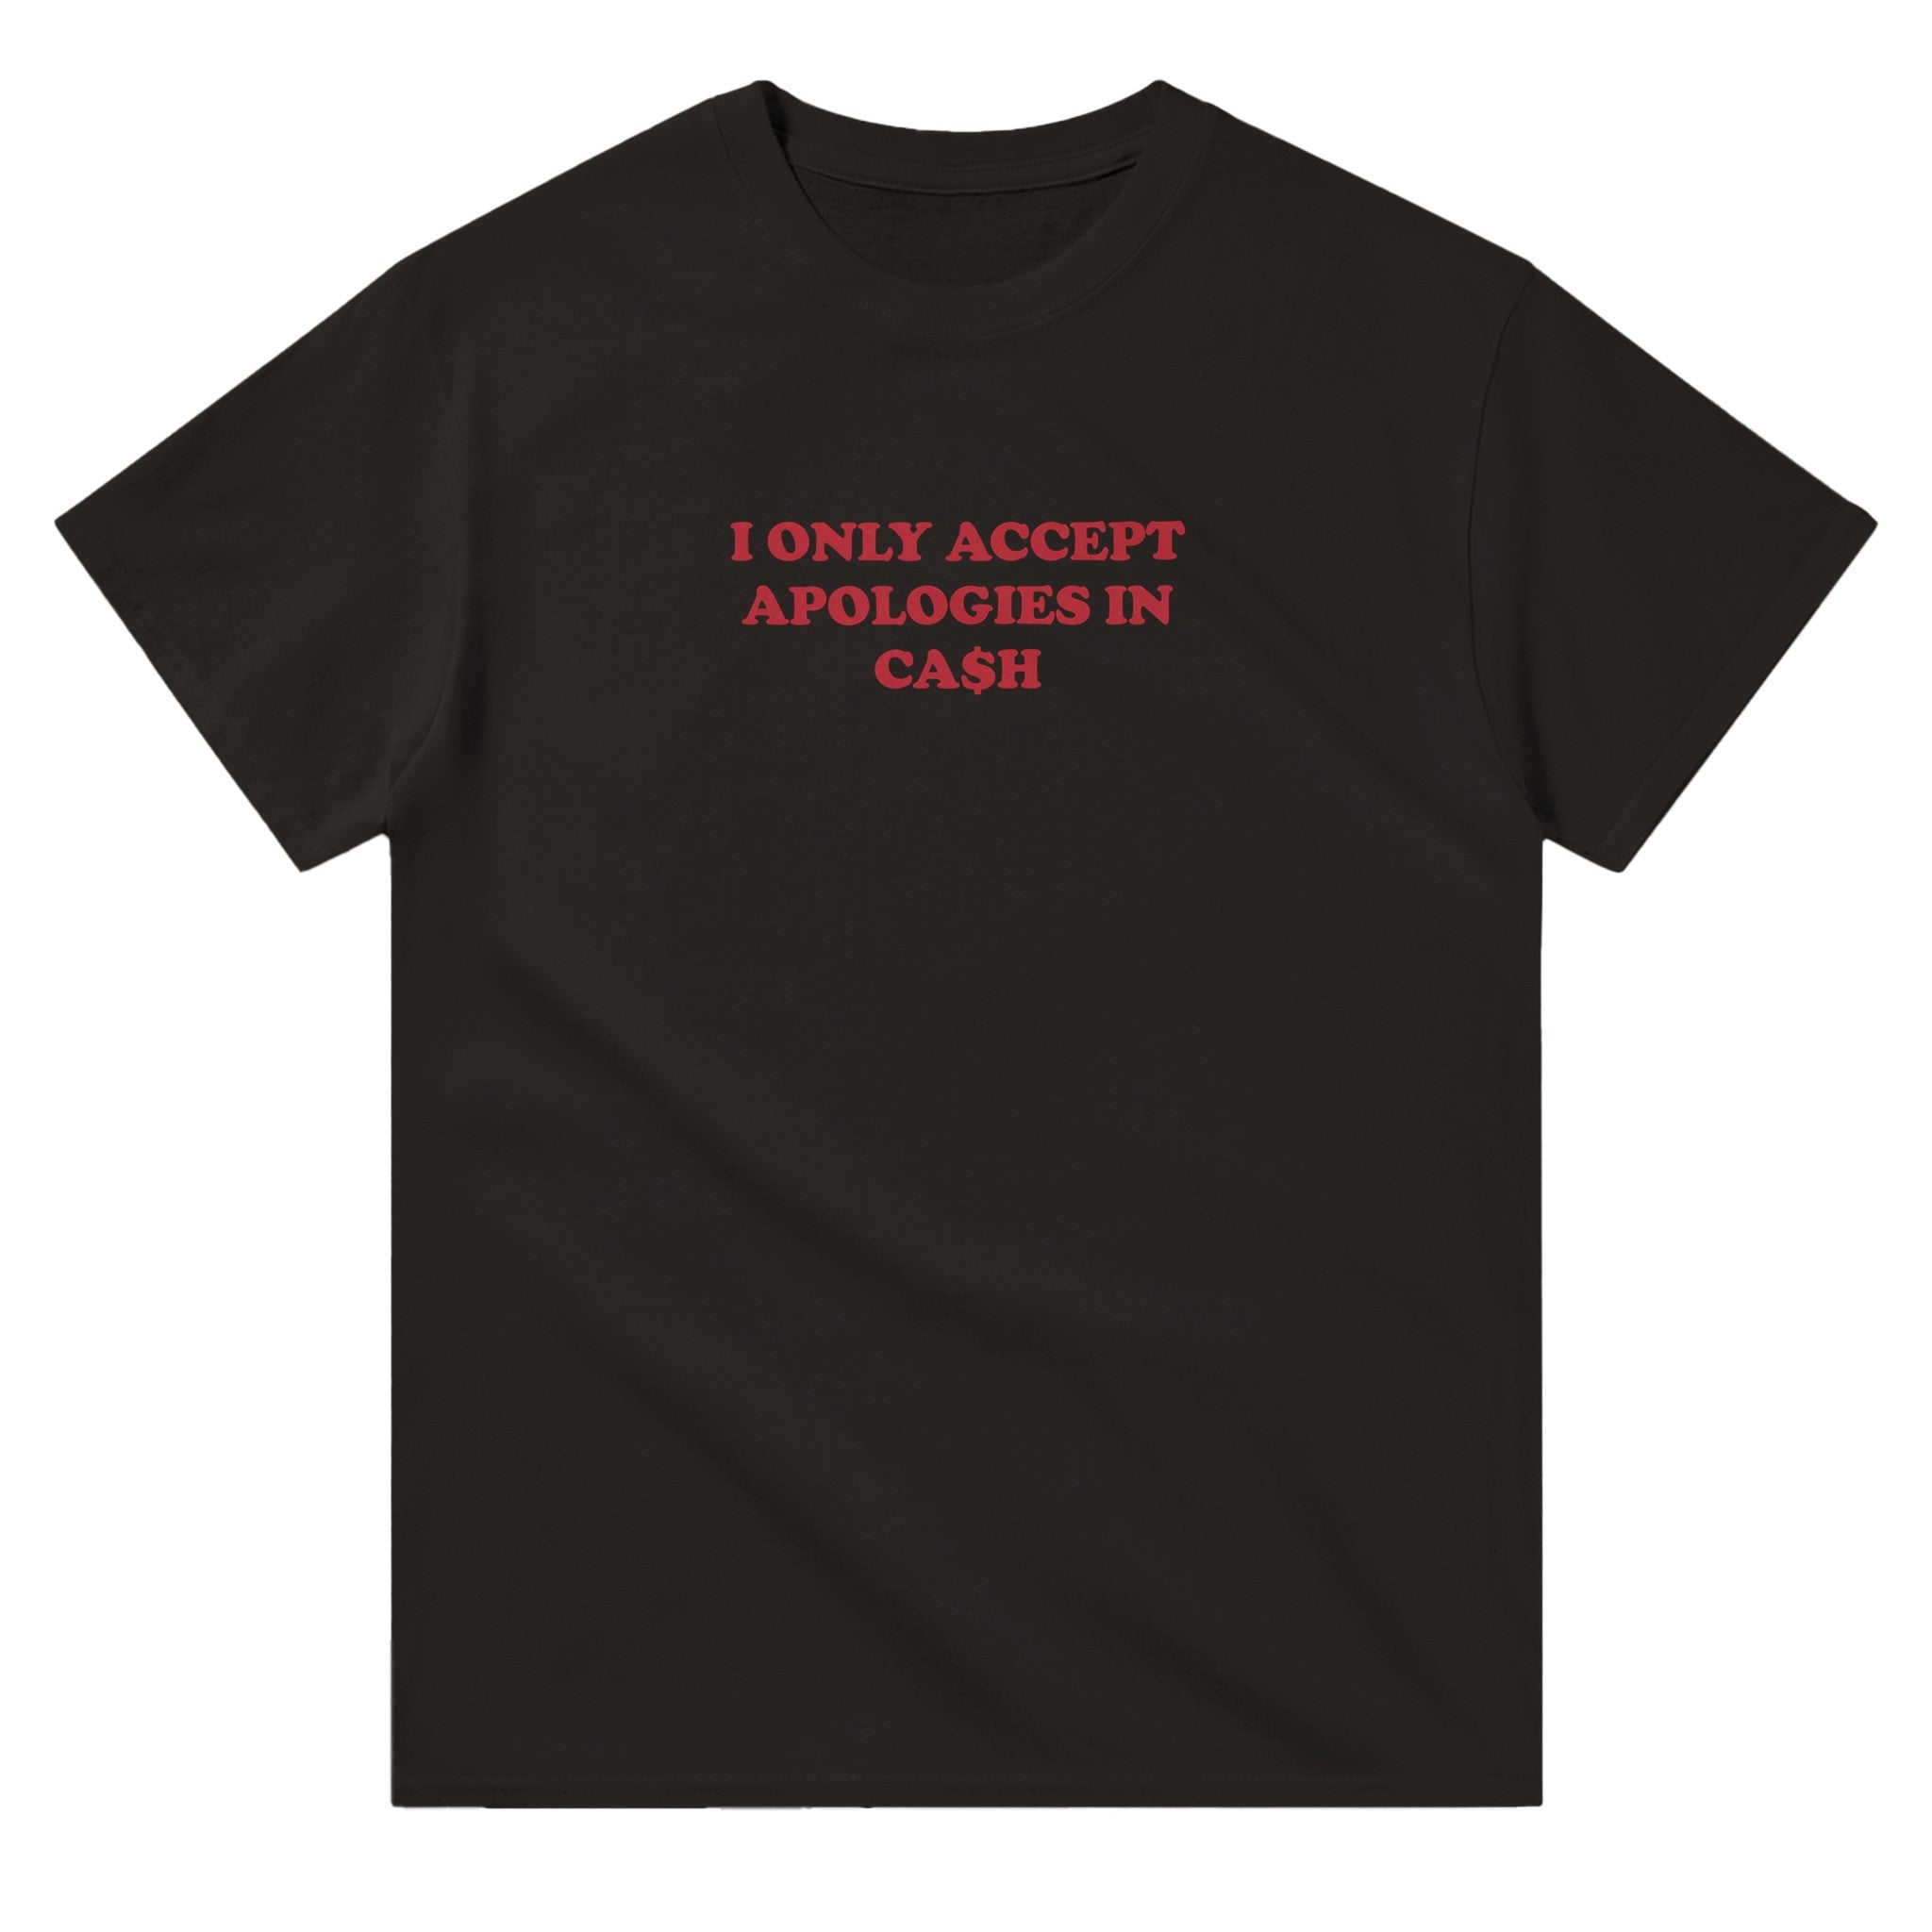 'I Only Accept Apologies in Cash' classic tee - In Print We Trust